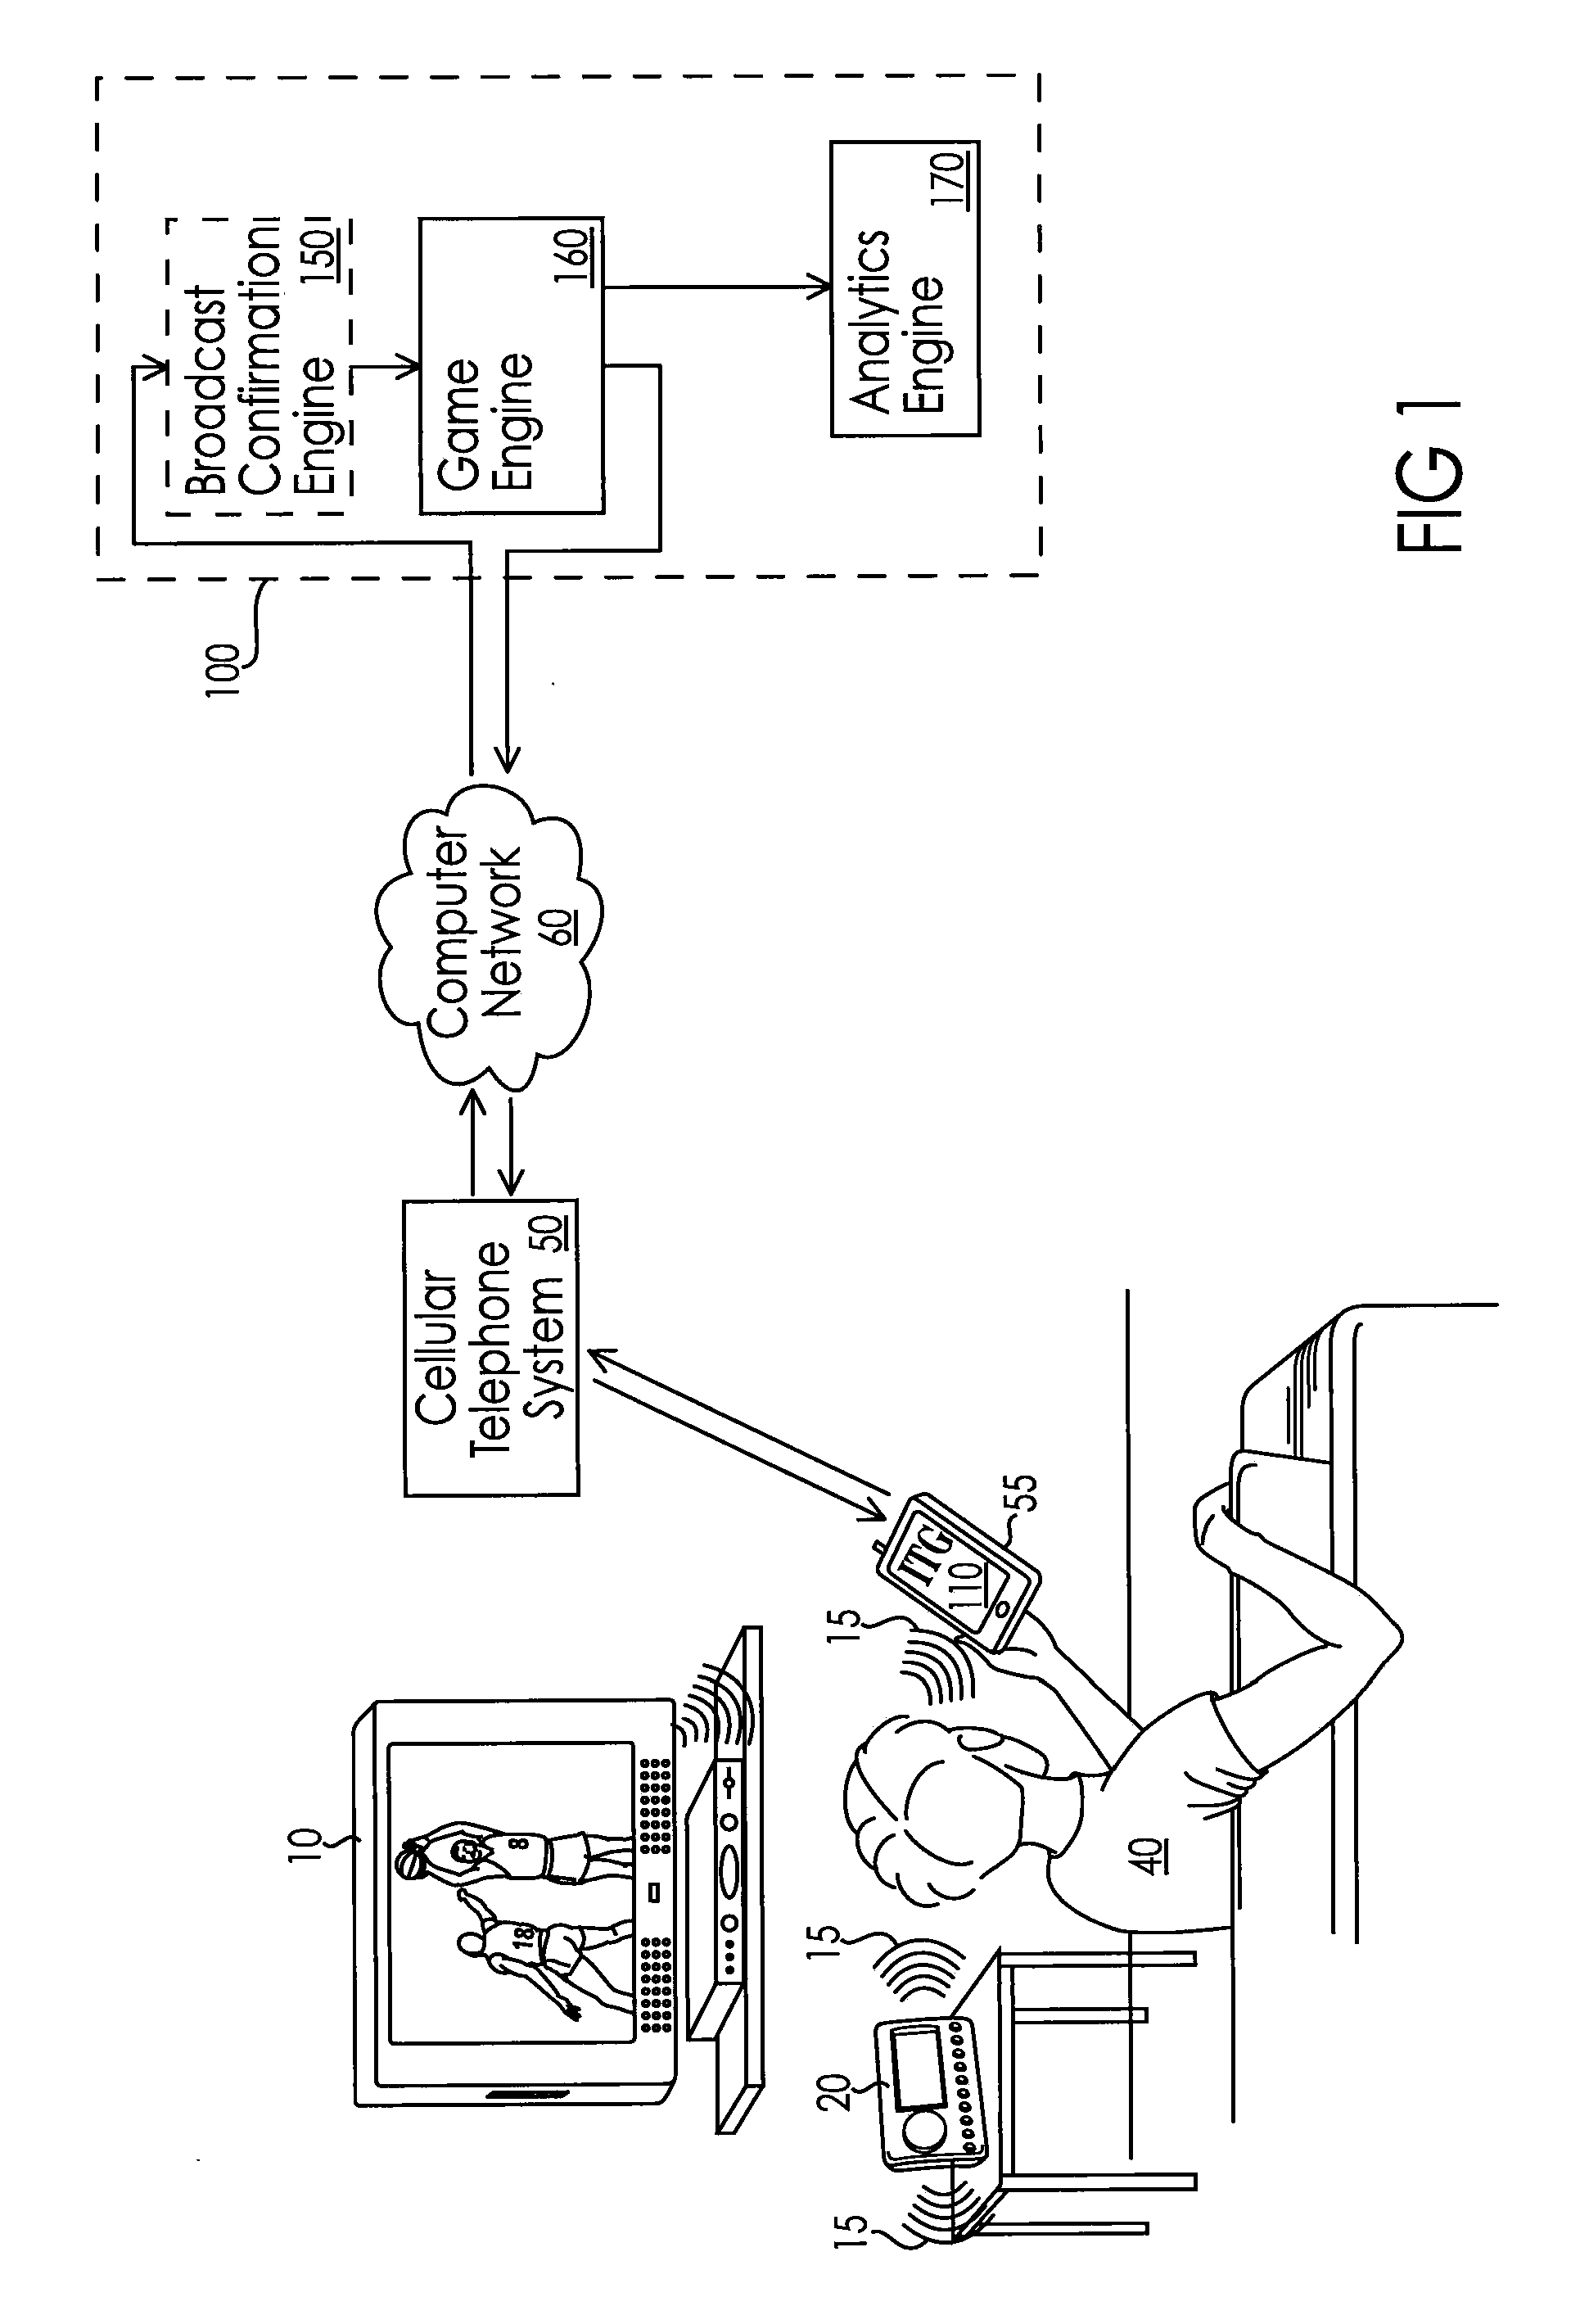 System and Method for Playing an Adjunct Game During a Live Sporting Event